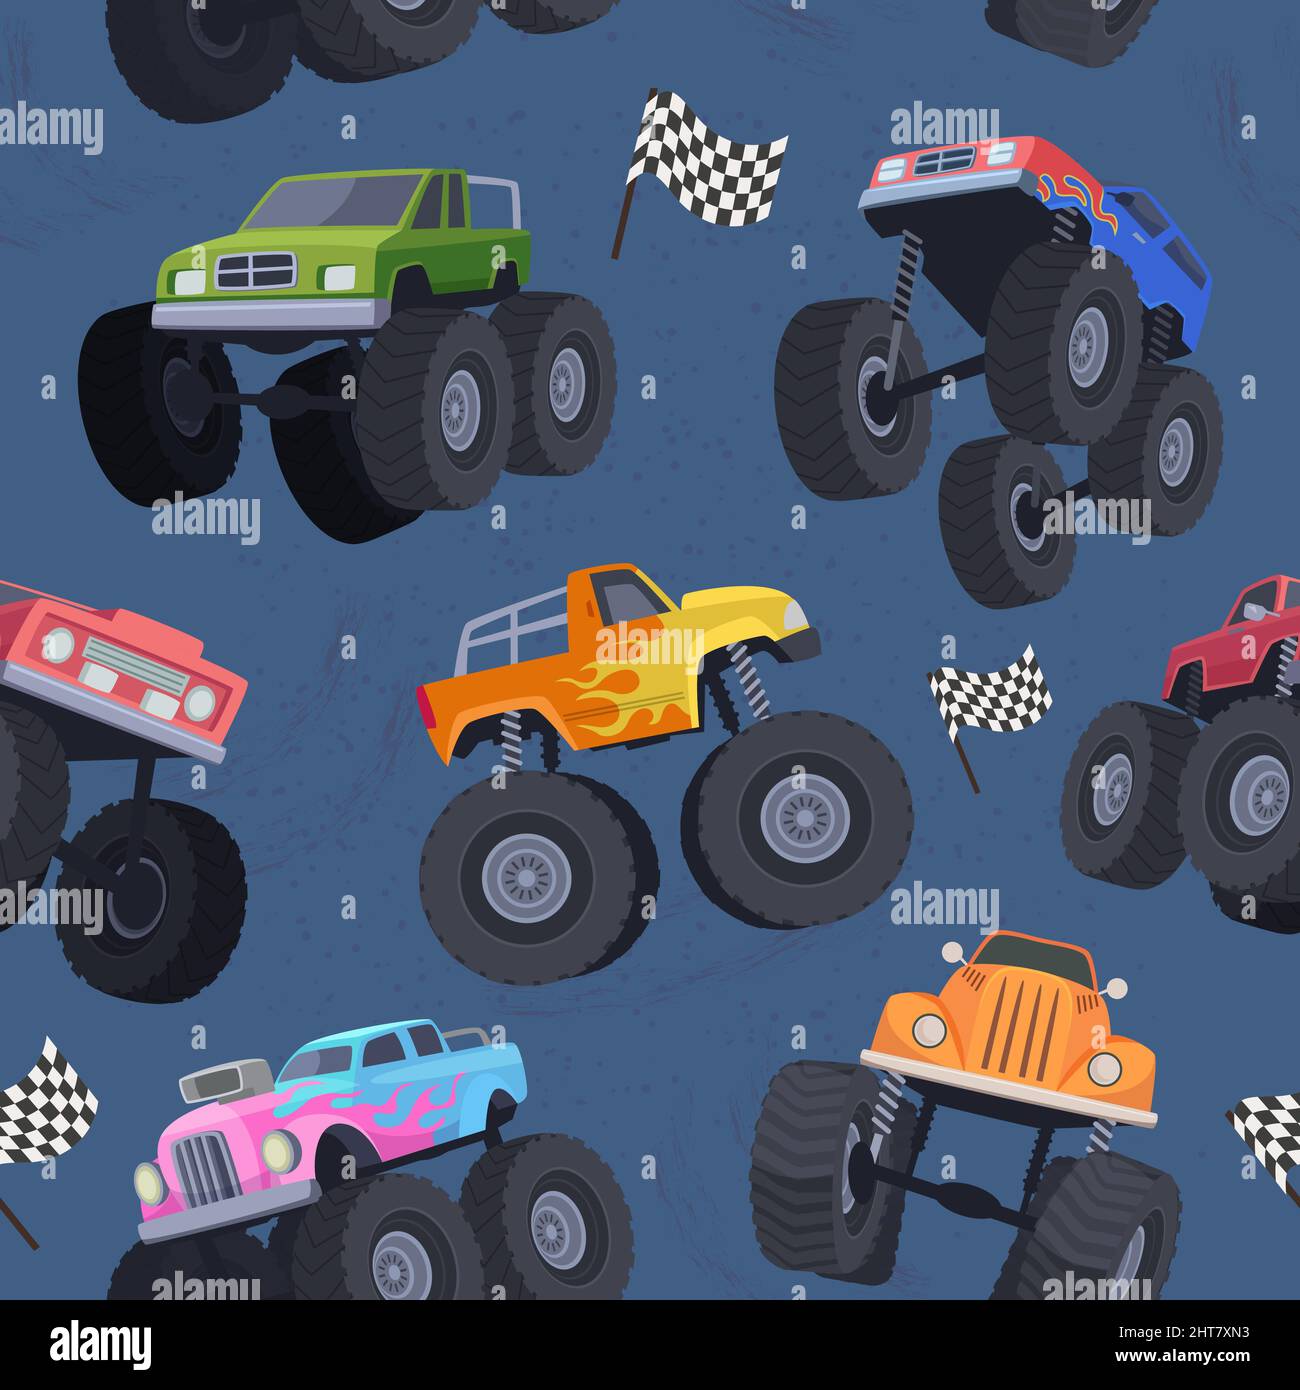 Monster truck pattern. Textile template illustrations with big wheel cars exact vector seamless background Stock Vector